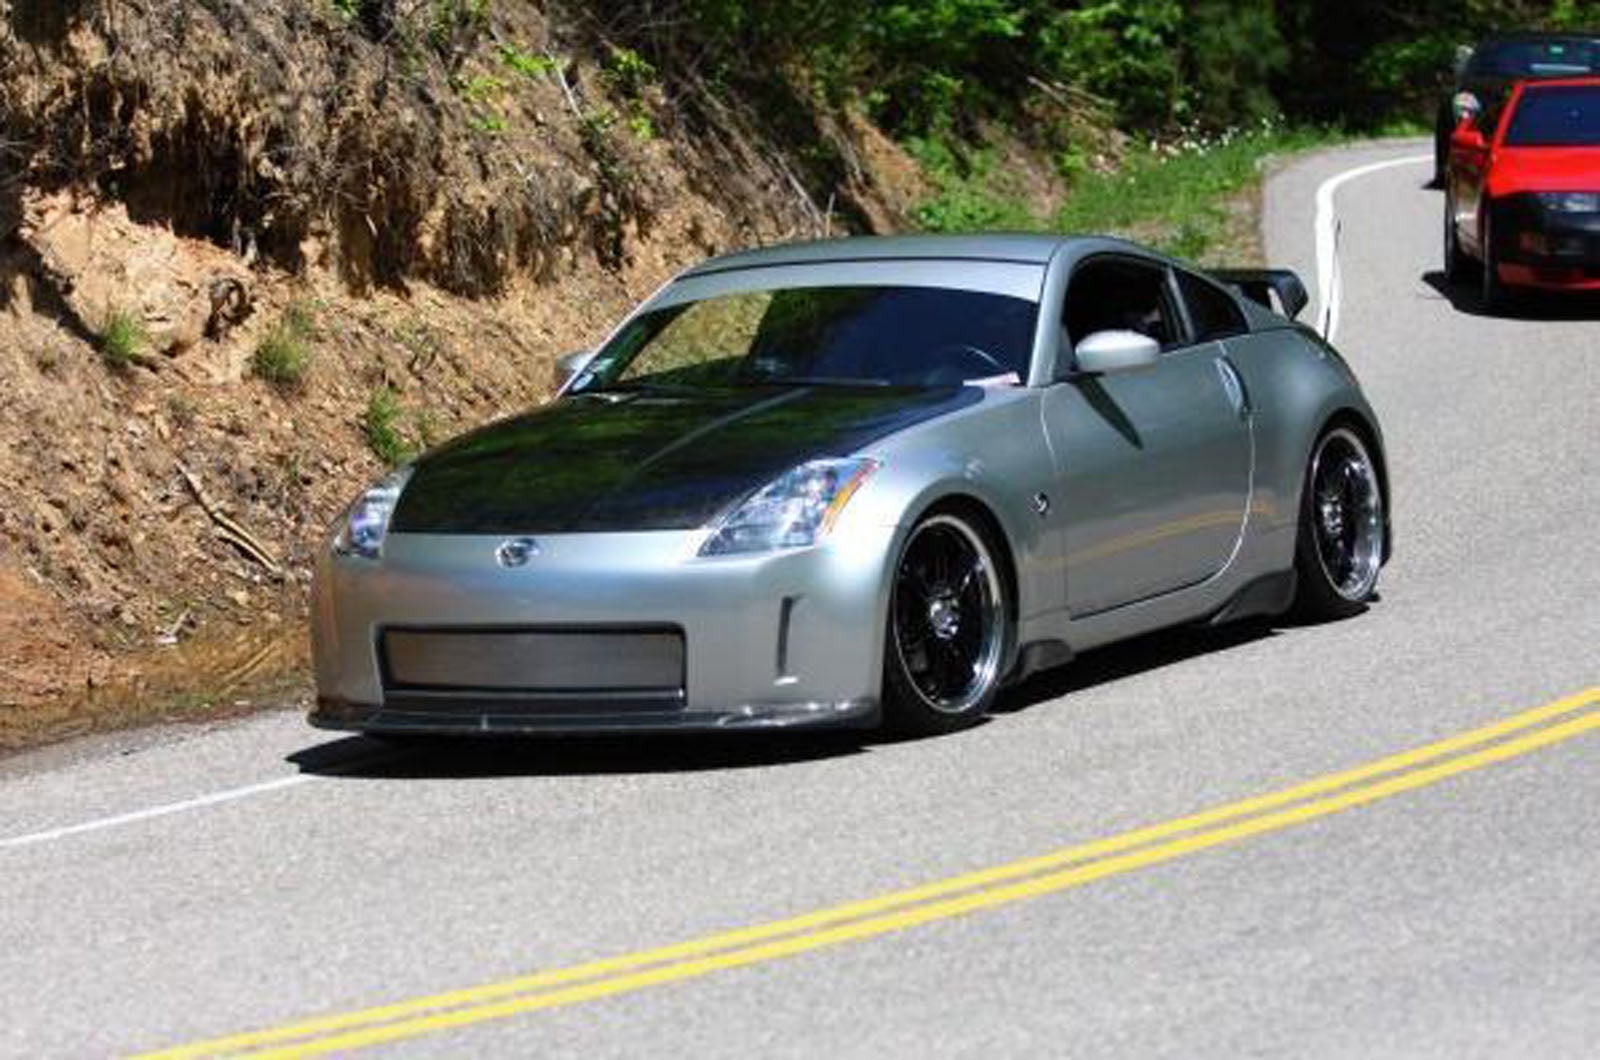 Modified nissan 350z for sale uk #6